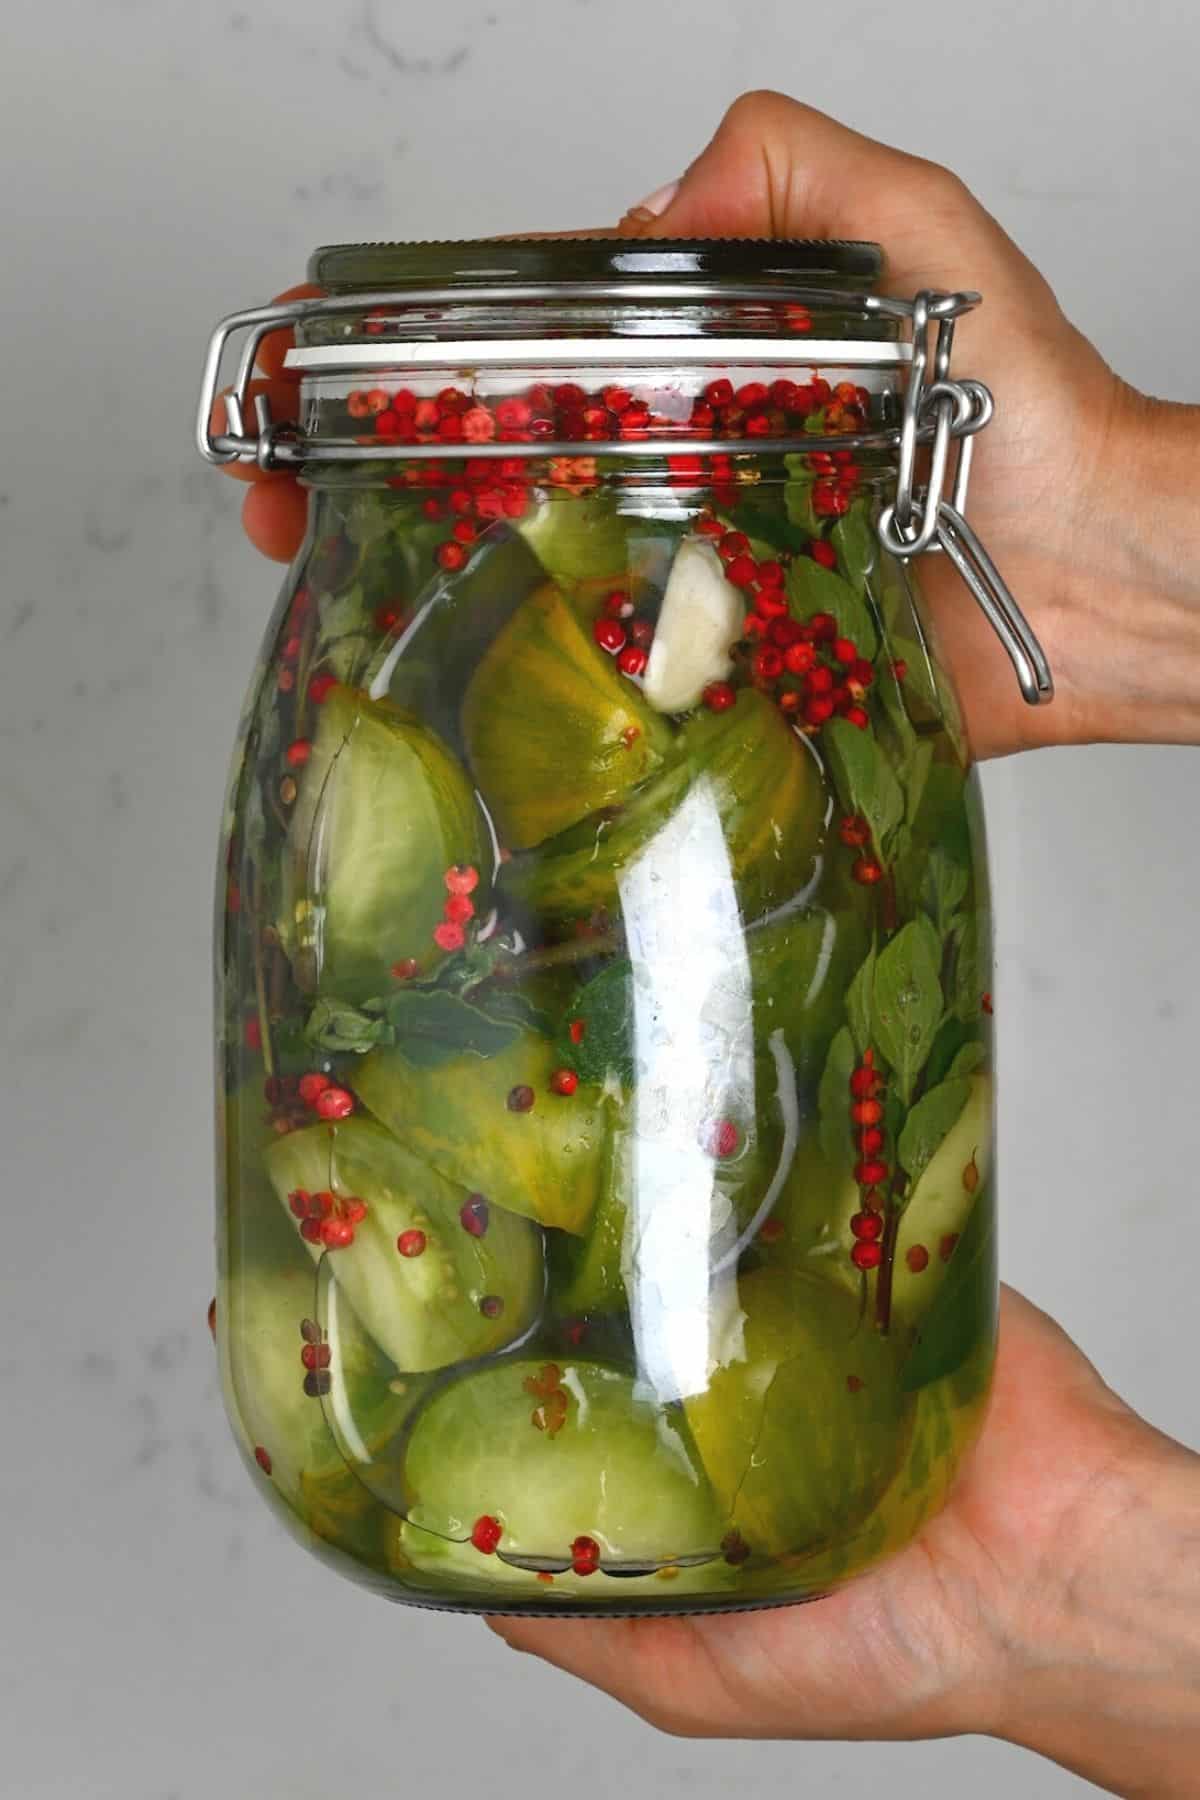 Green Tomato Pickles Recipe for Canning